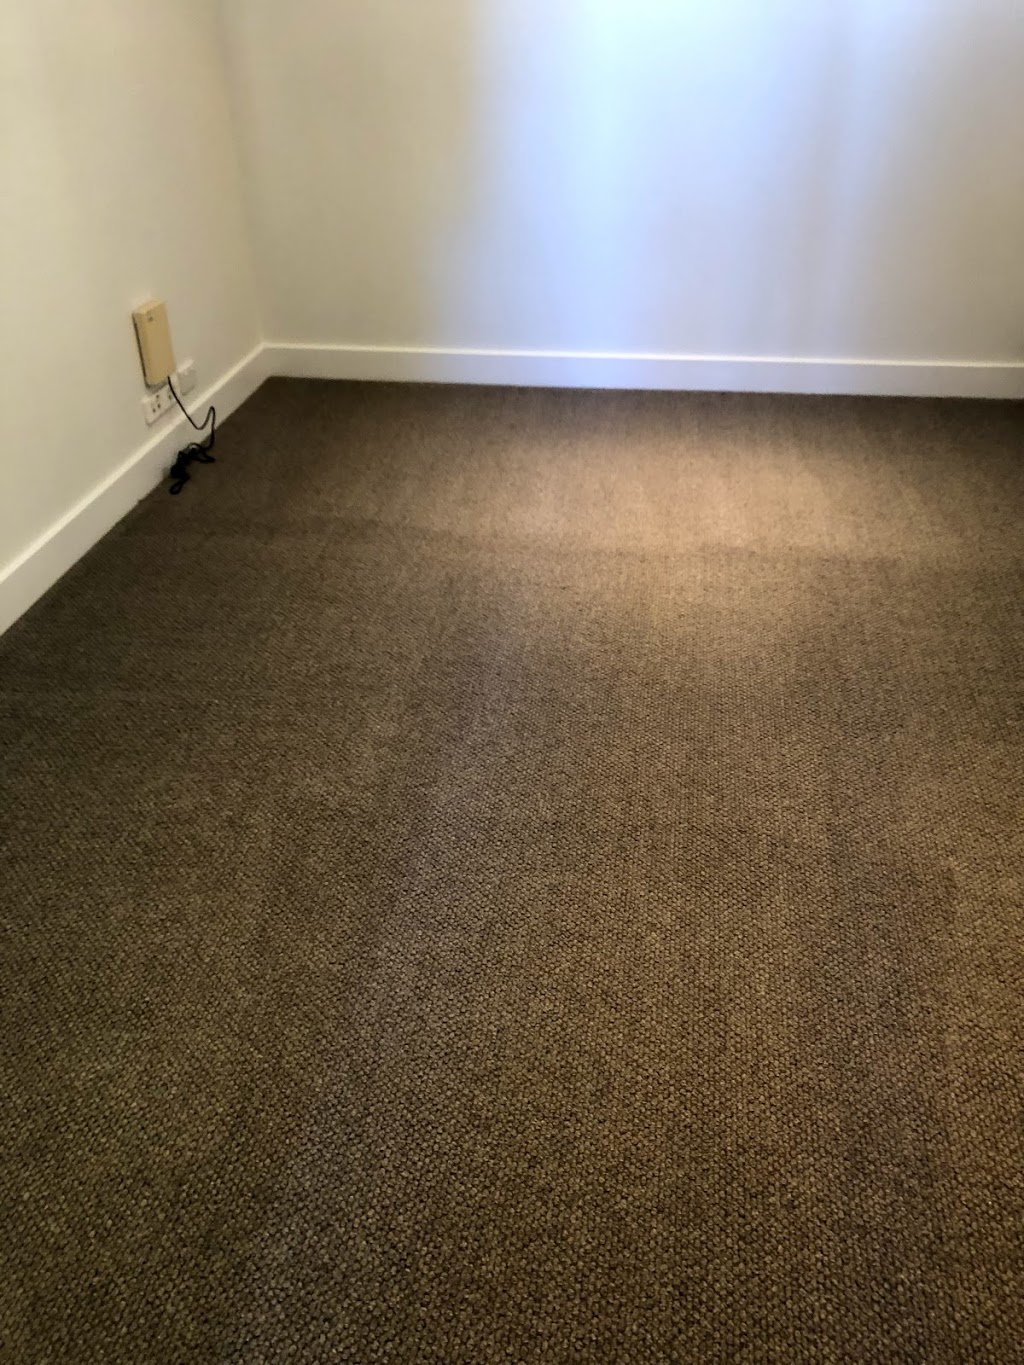 Carpet Cleaning Melbourne | laundry | Carpet Cleaning Melbourne, 2a Sunnyside Ave, Dandenong VIC 3175, Australia | 0481830133 OR +61 481 830 133